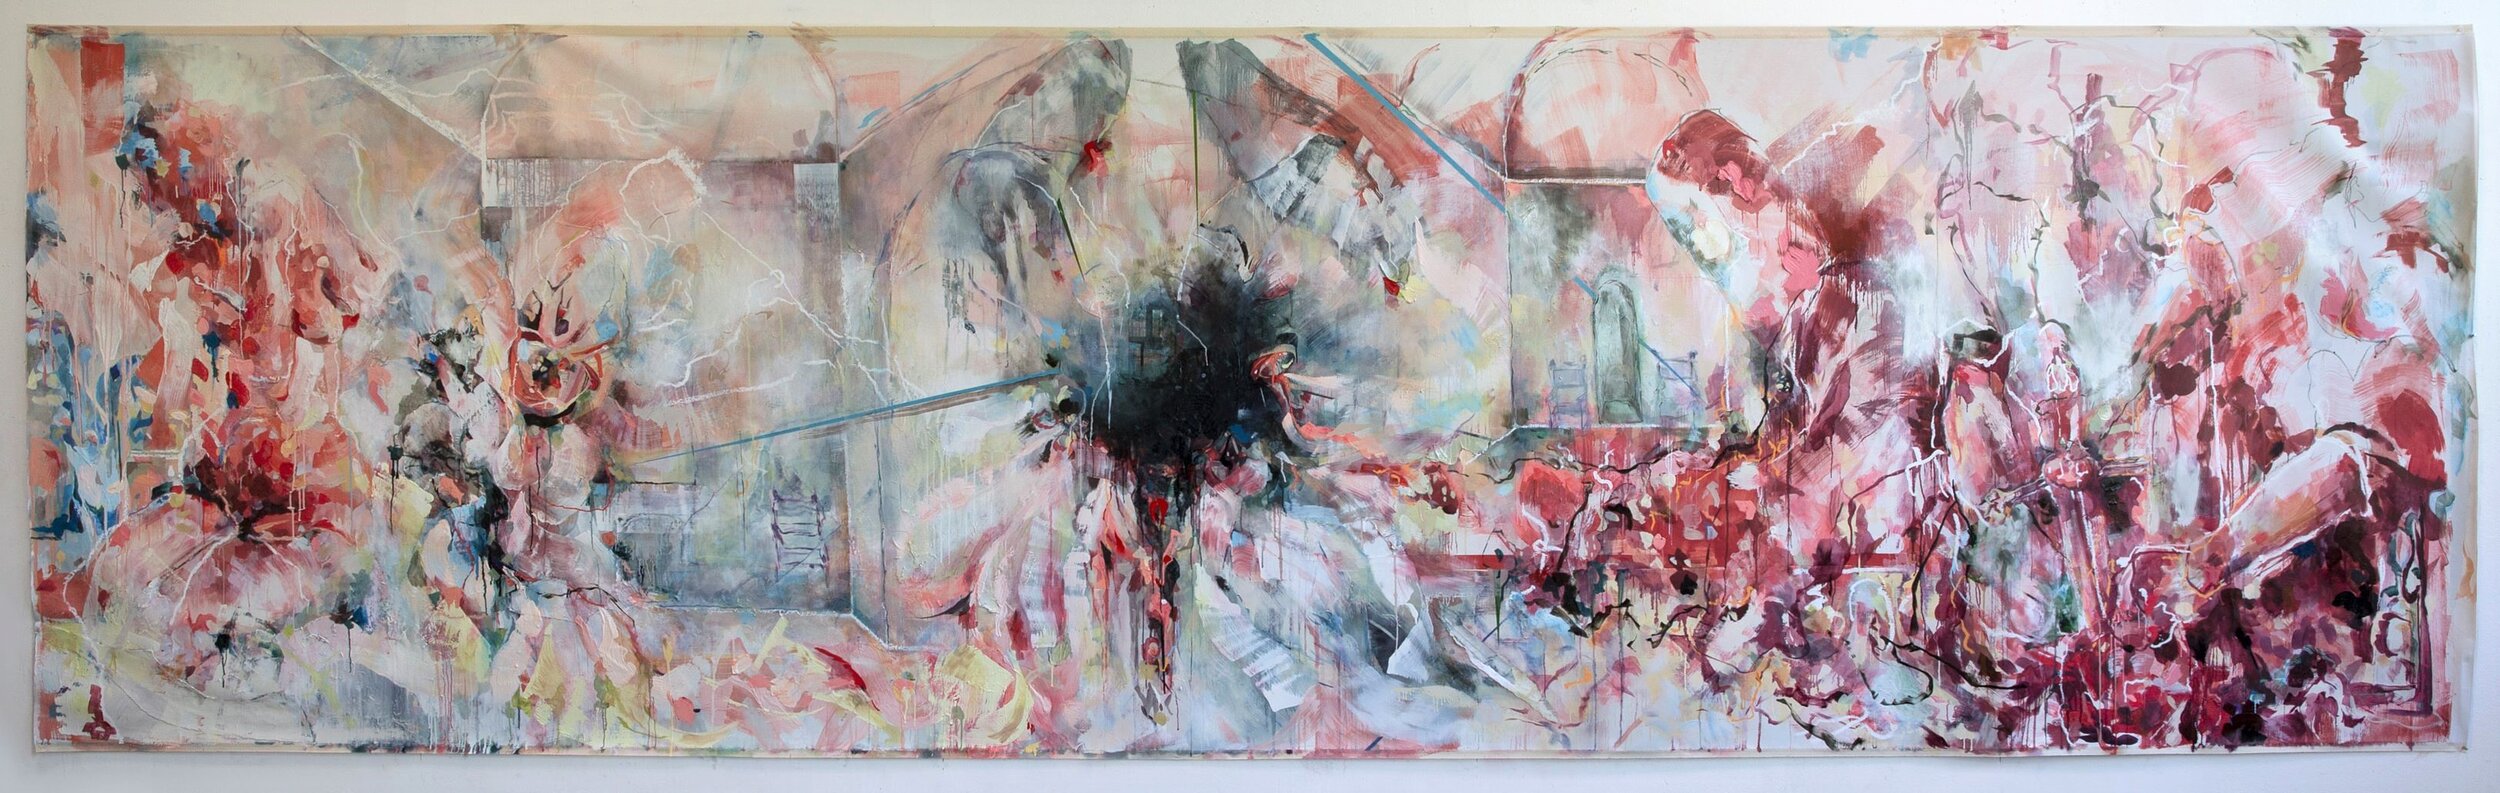   Winged Schism,  Oil and Mixed Media on Canvas, 64.5” x 216”, 2021 